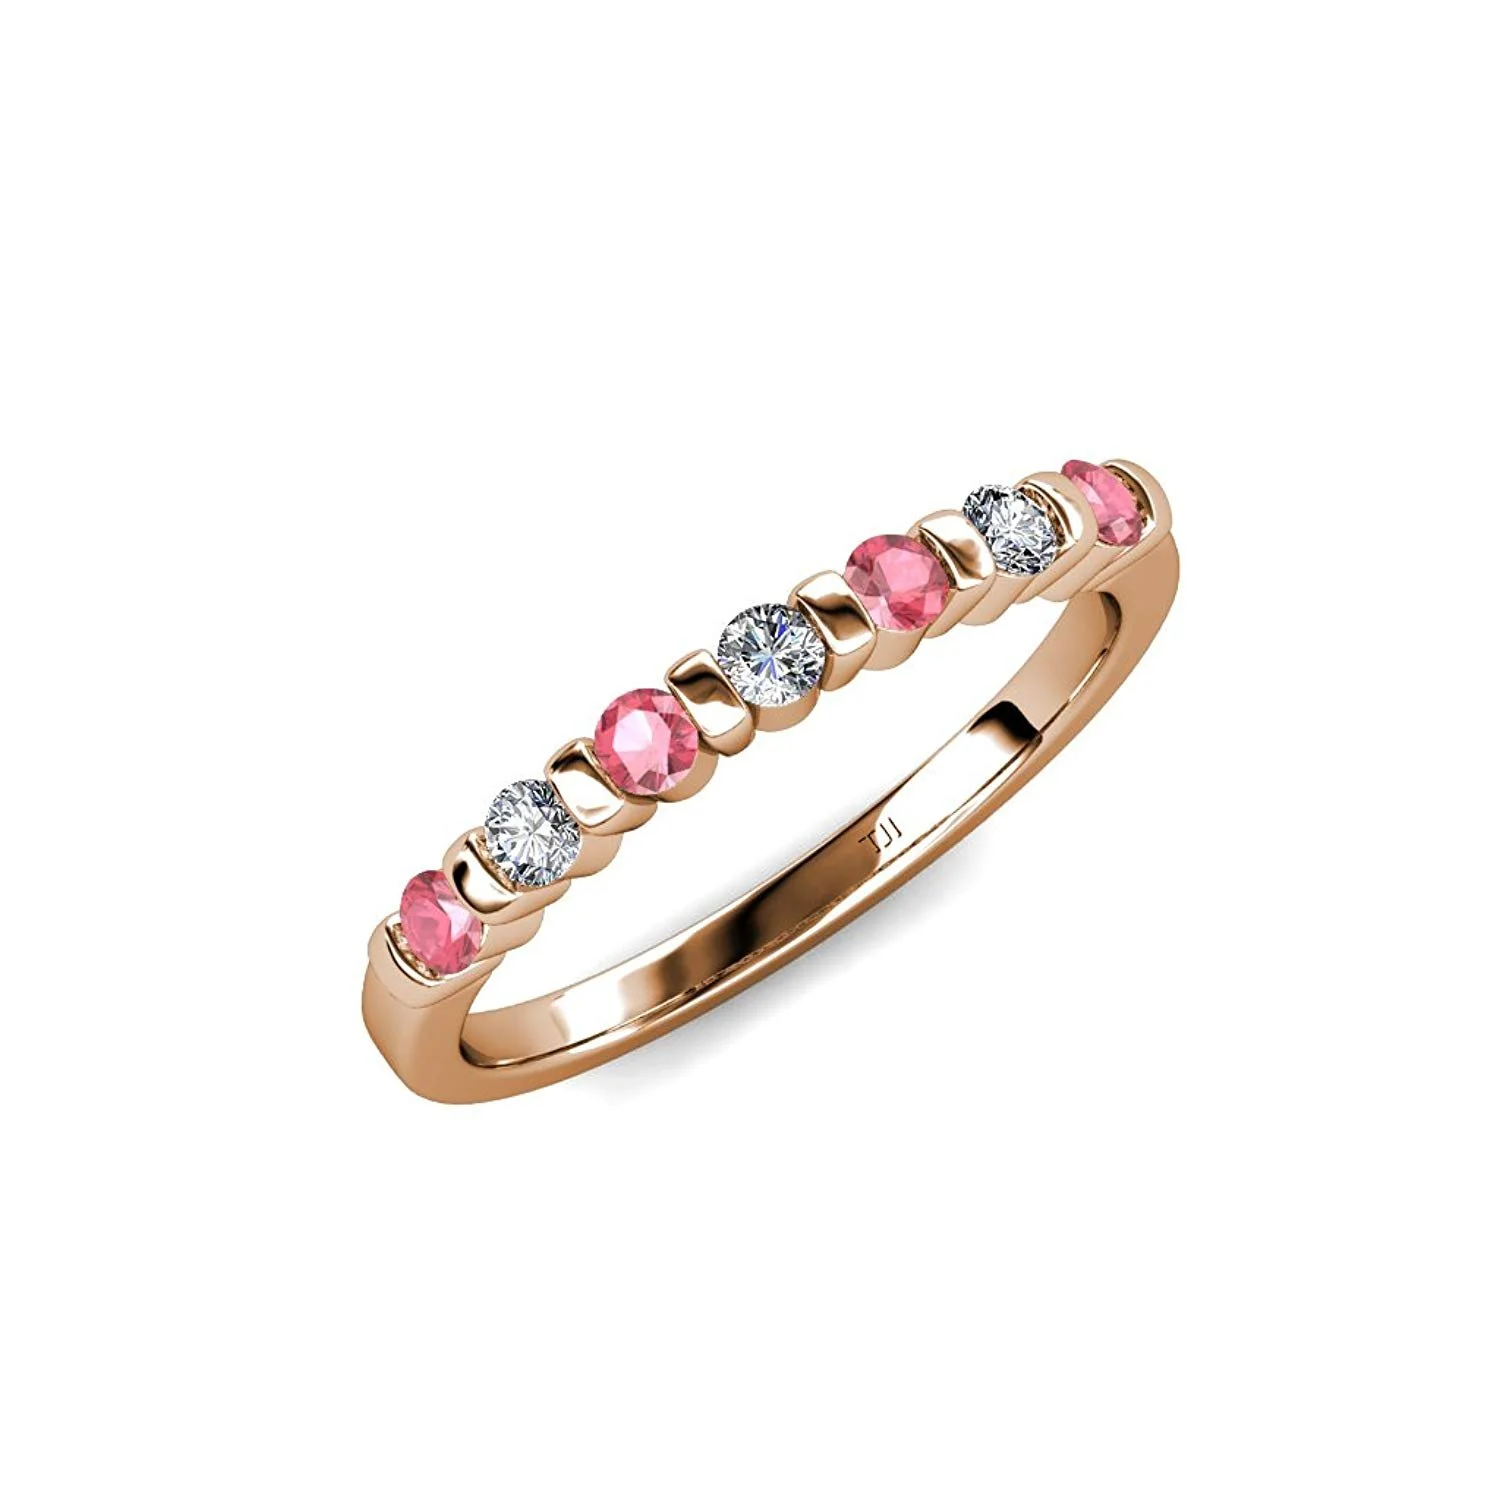 Pink Tourmaline and Diamond 7 Stone Wedding Band 0.22 ct tw in 14K Rose Gold.size 6